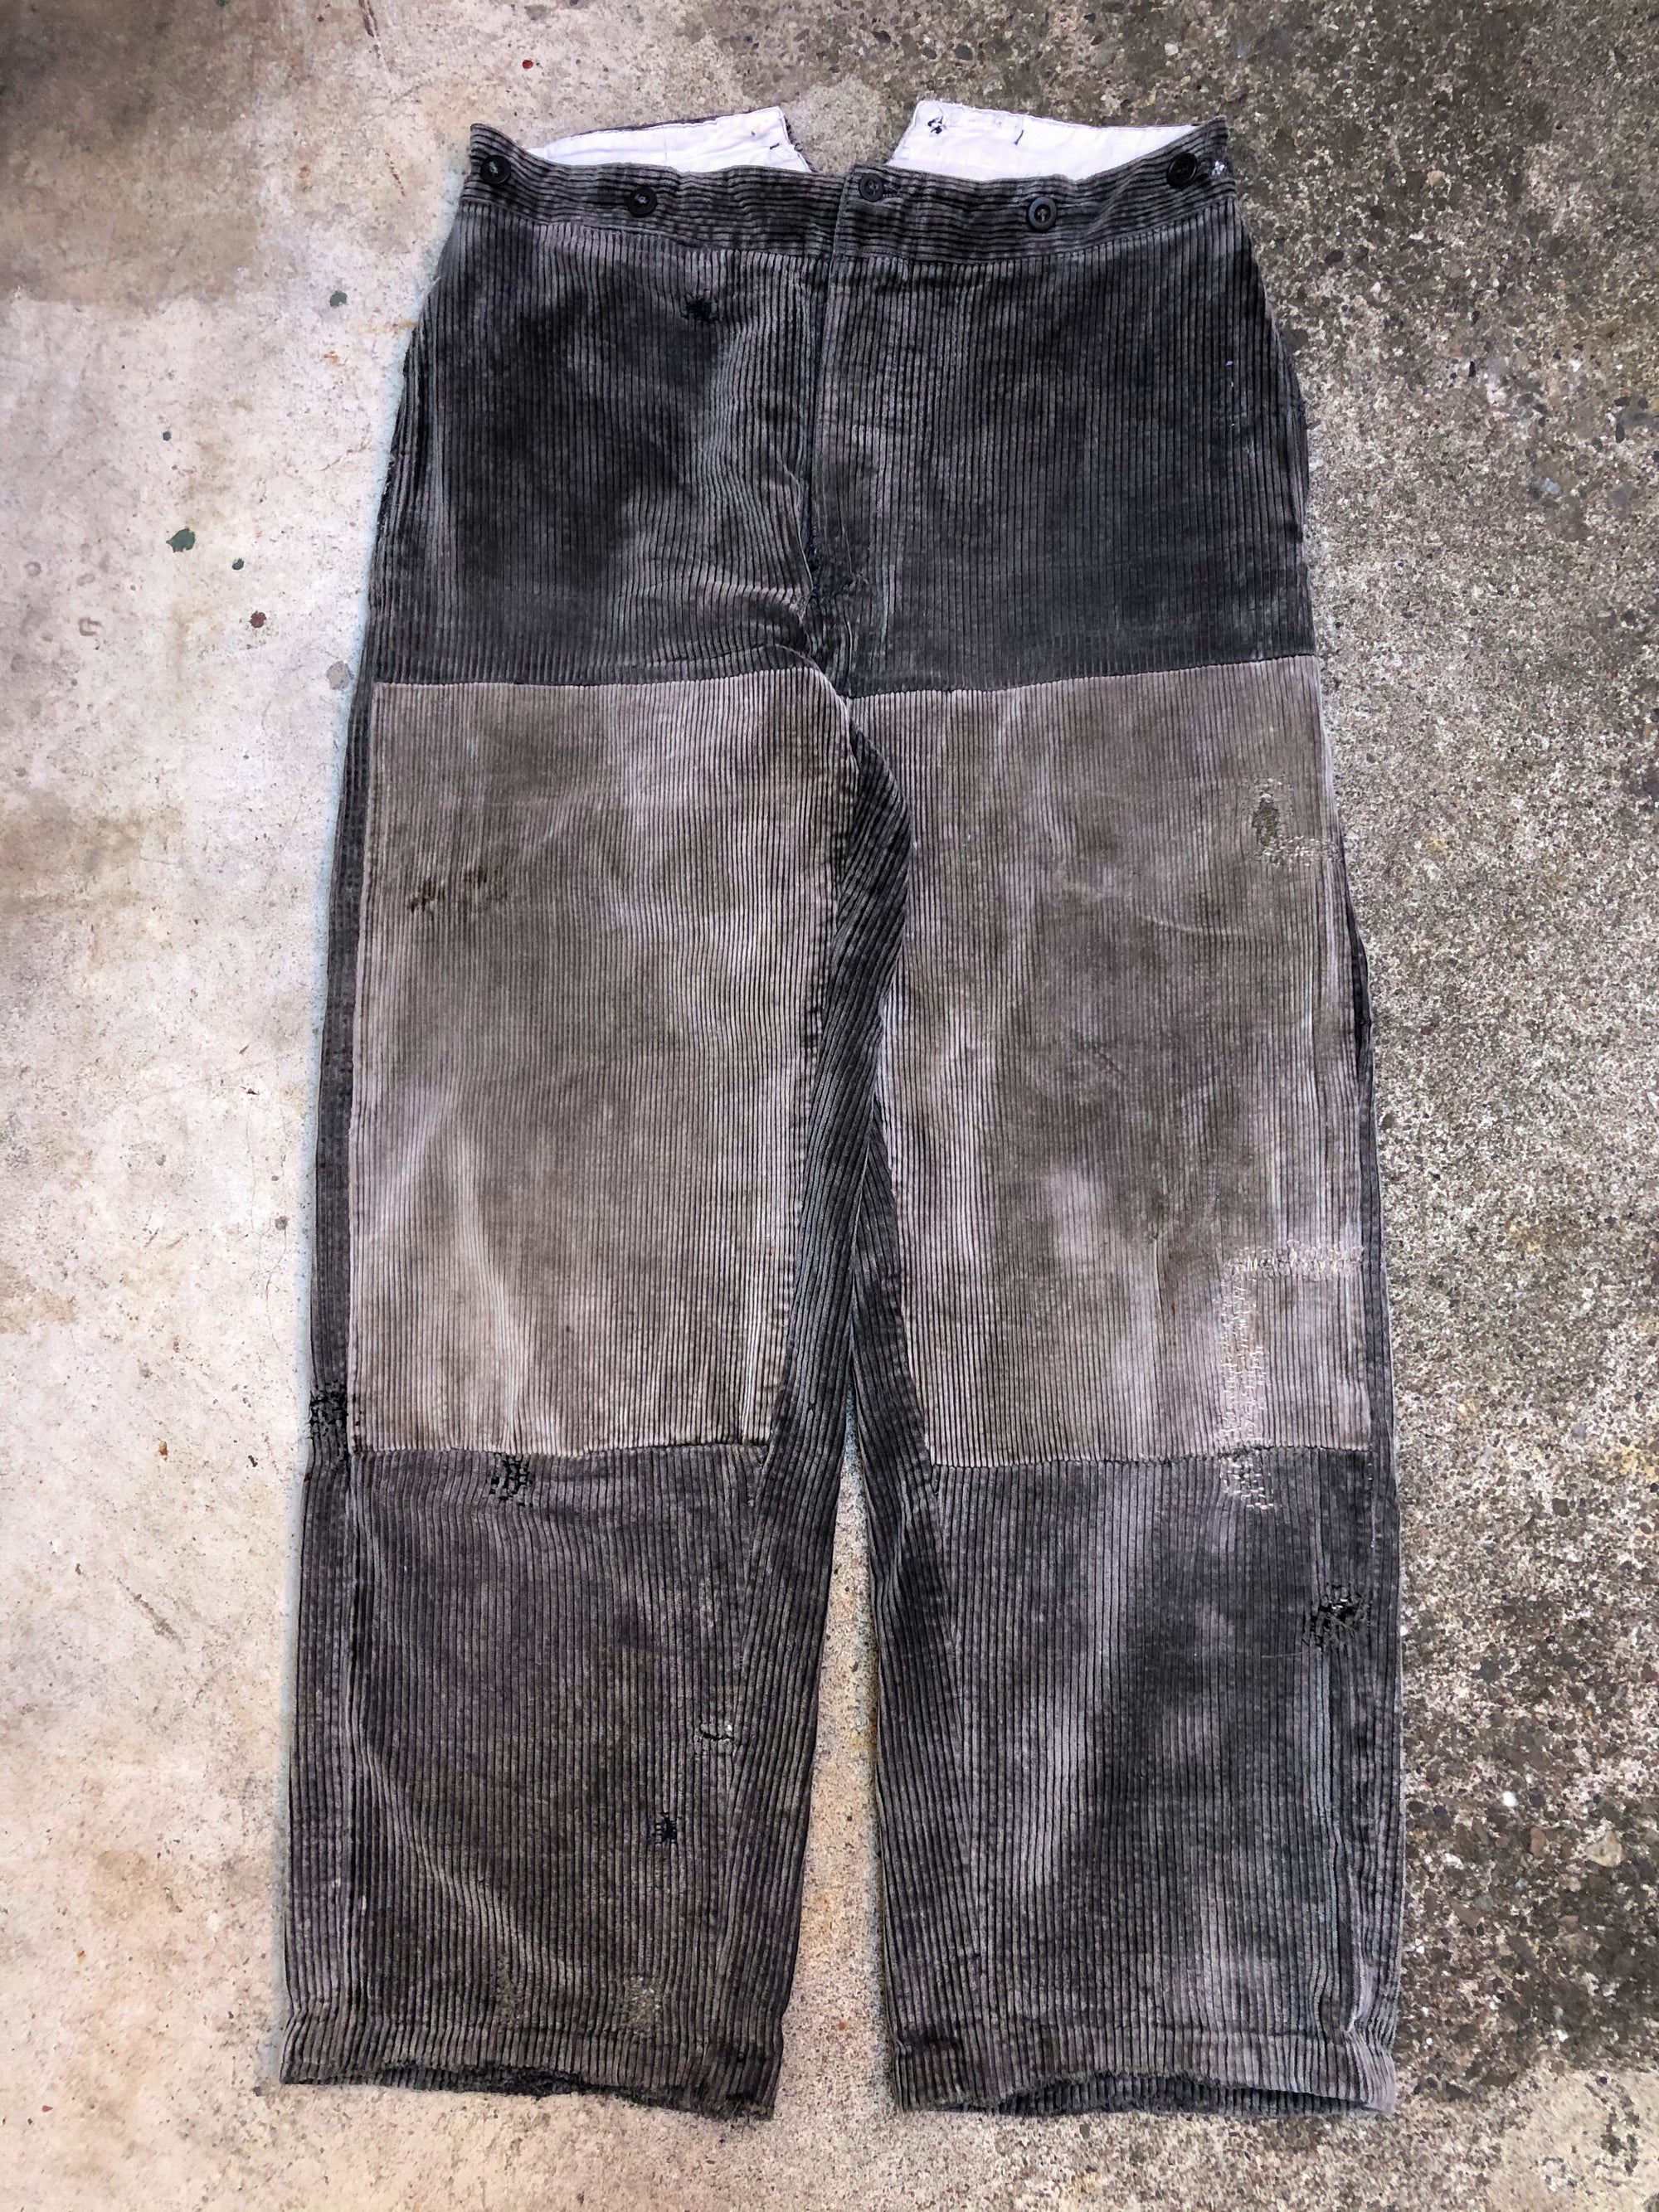 1930s Patchwork Repaired Corduroy French Work Pants (33/34X28)